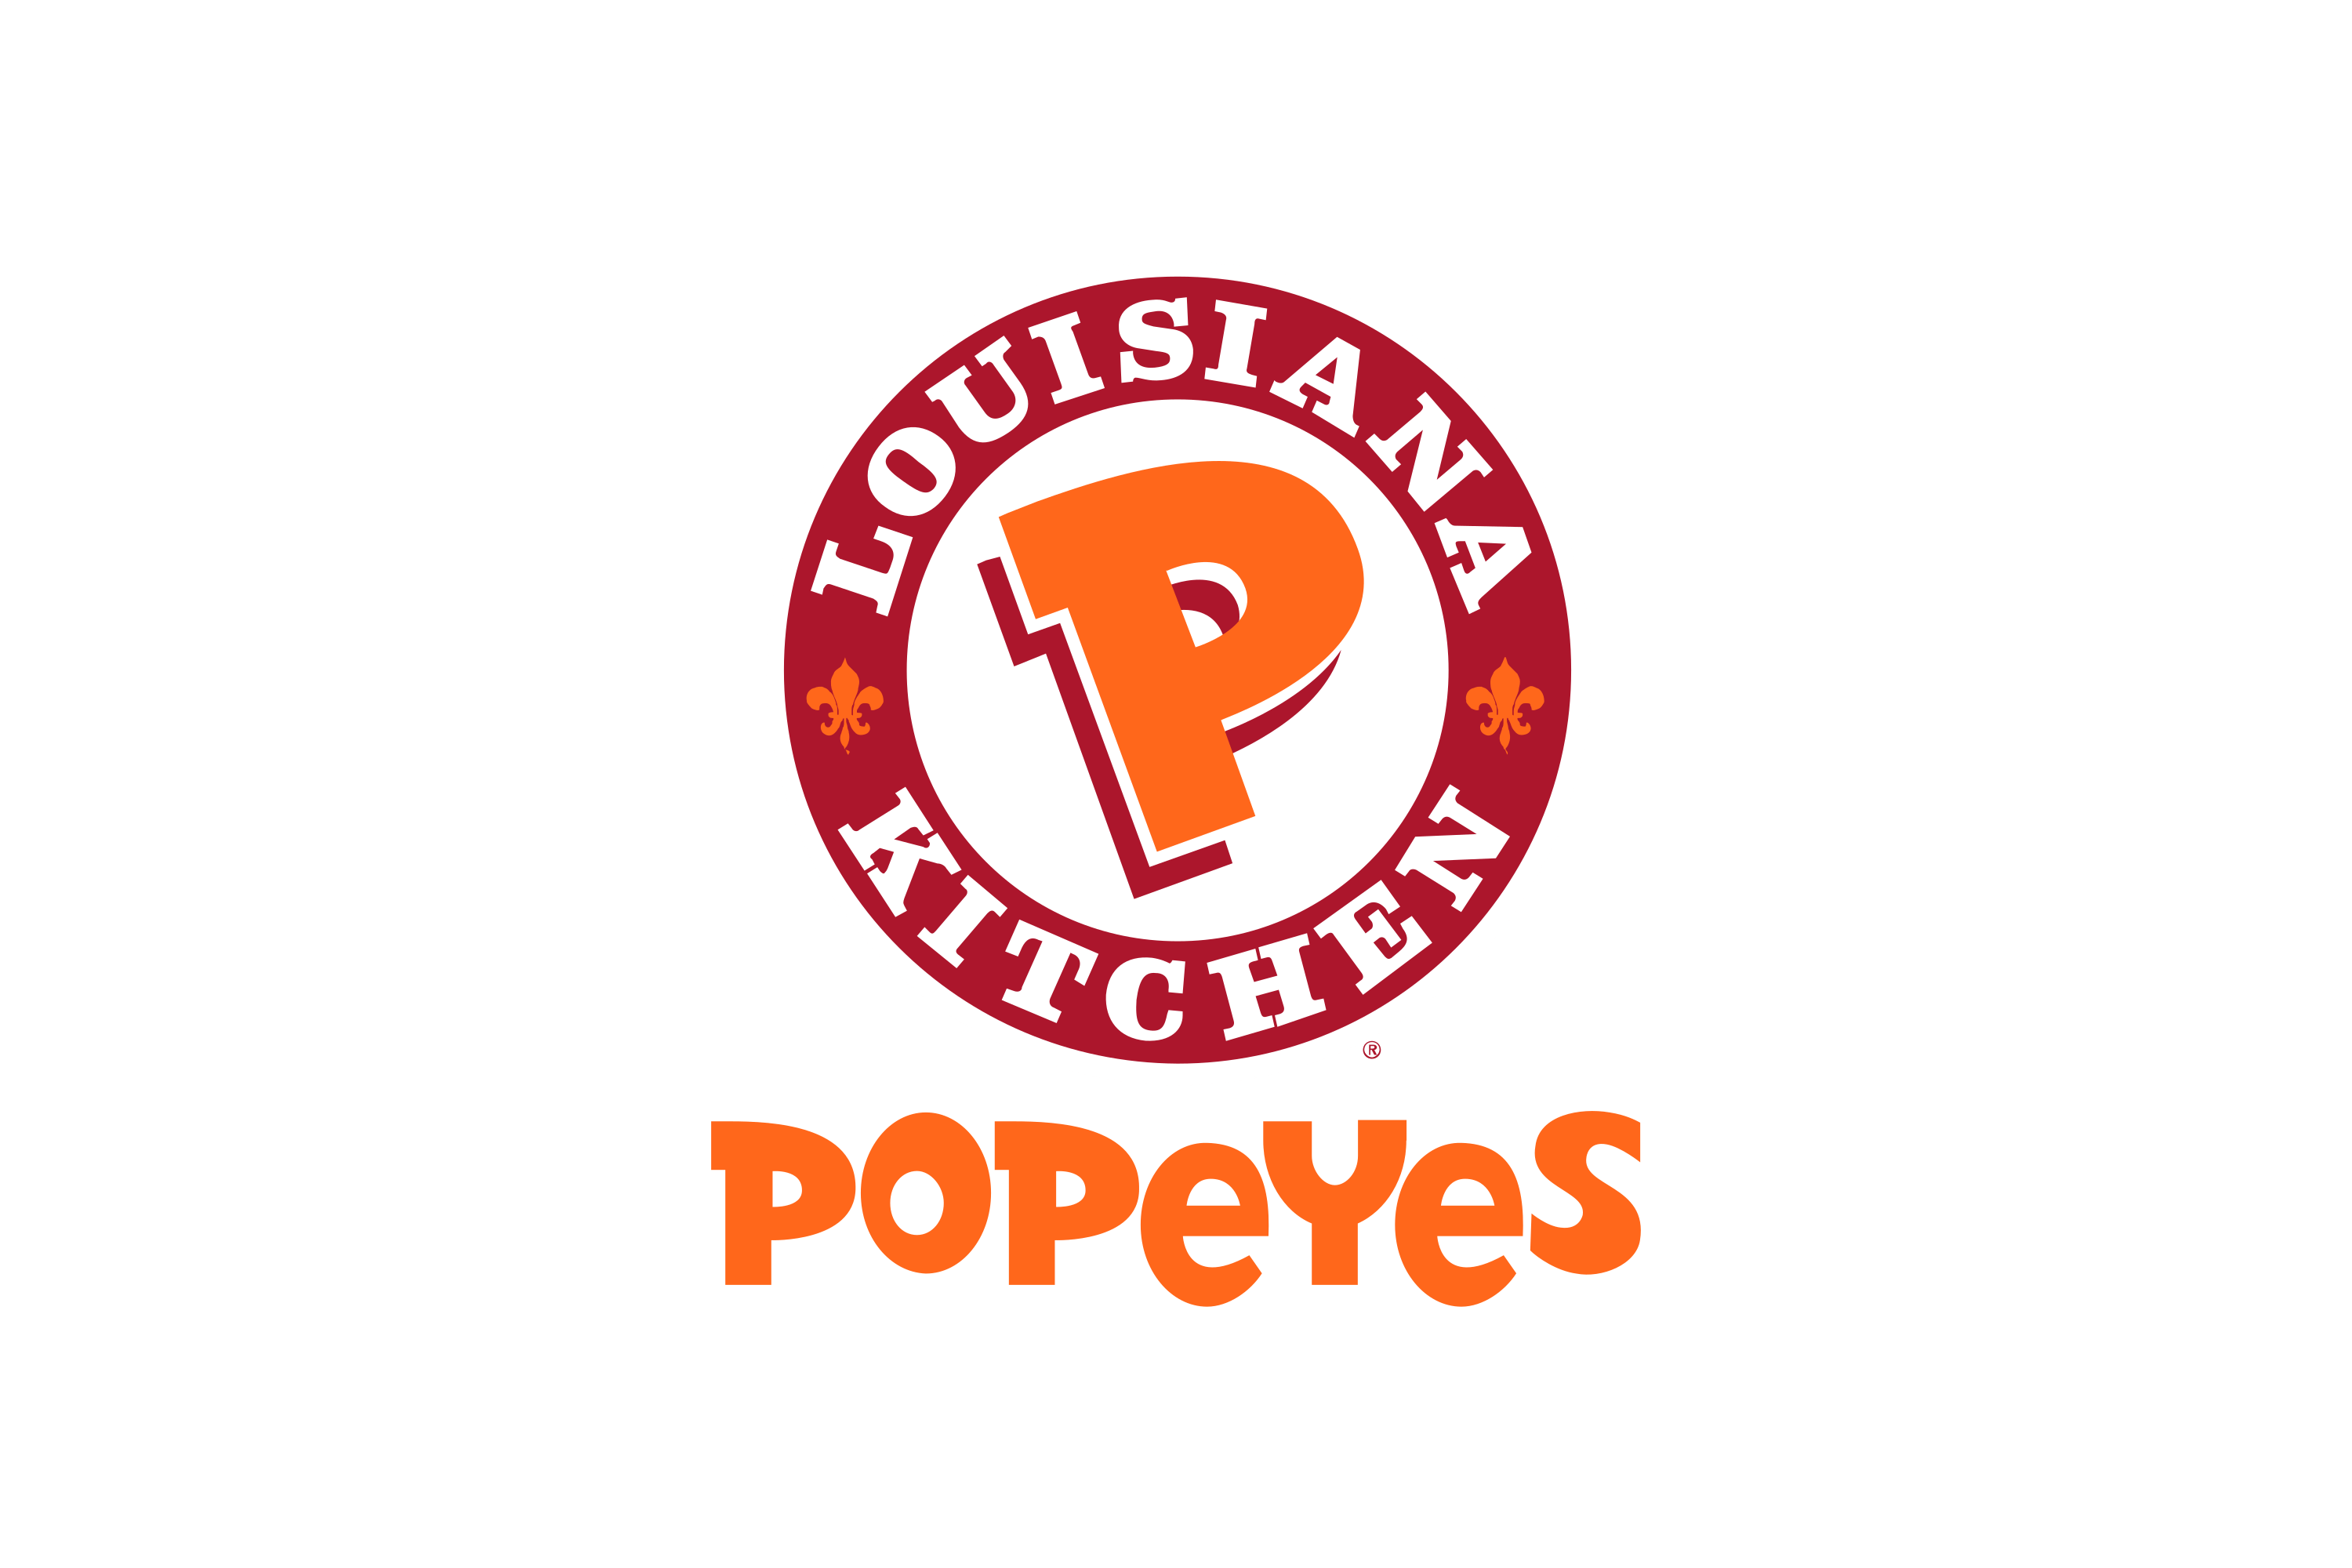 Download Popeyes Louisiana Kitchen Logo in SVG Vector or PNG File